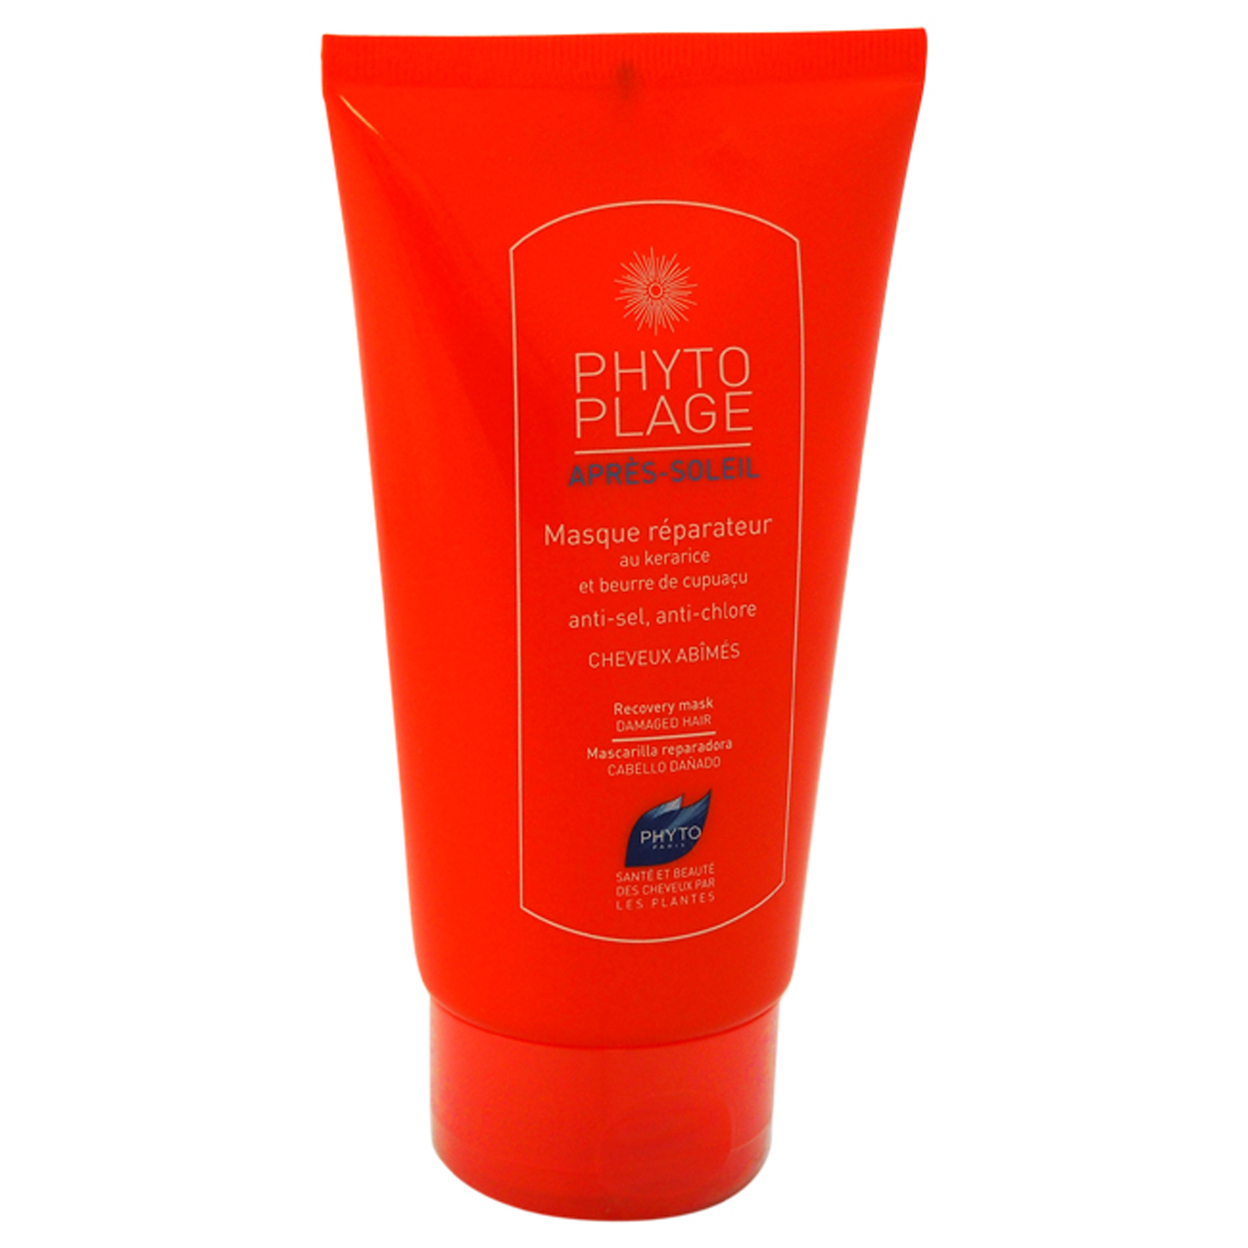 Phyto Plage Recovery Mask 4.2 Oz 4.2 Oz